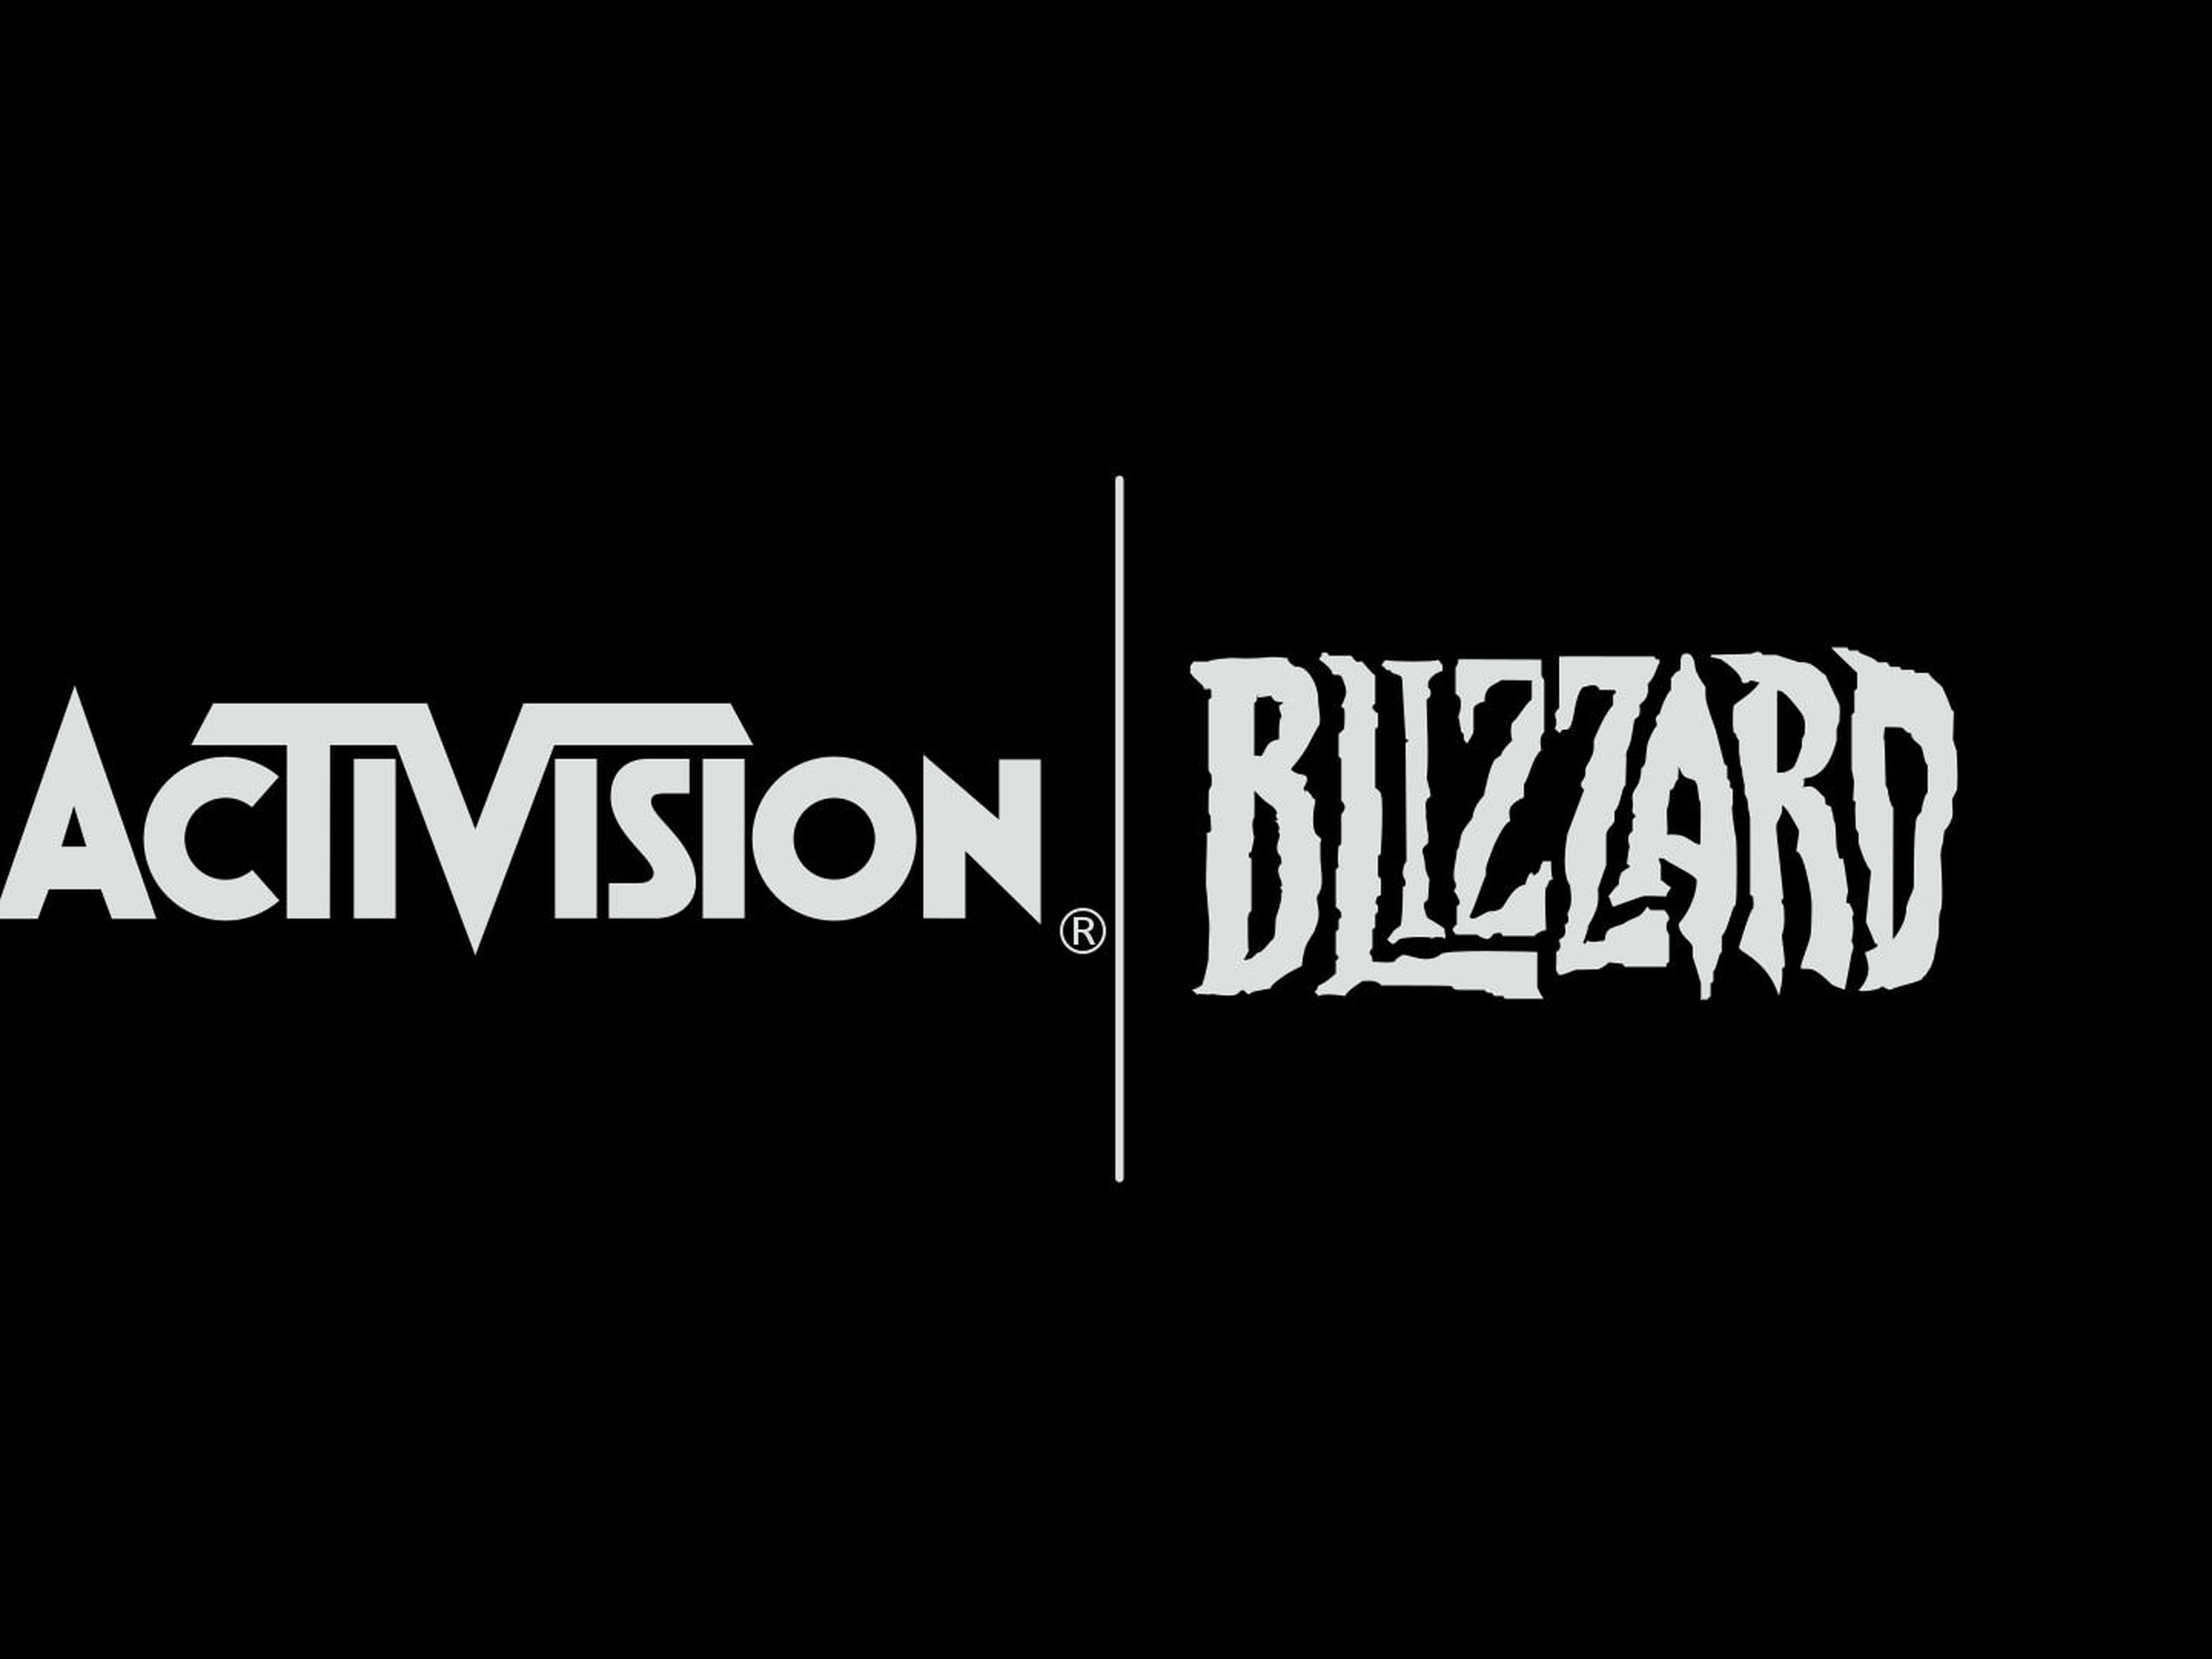 Serbia Approves Microsoft's Acquisition of Activision Blizzard